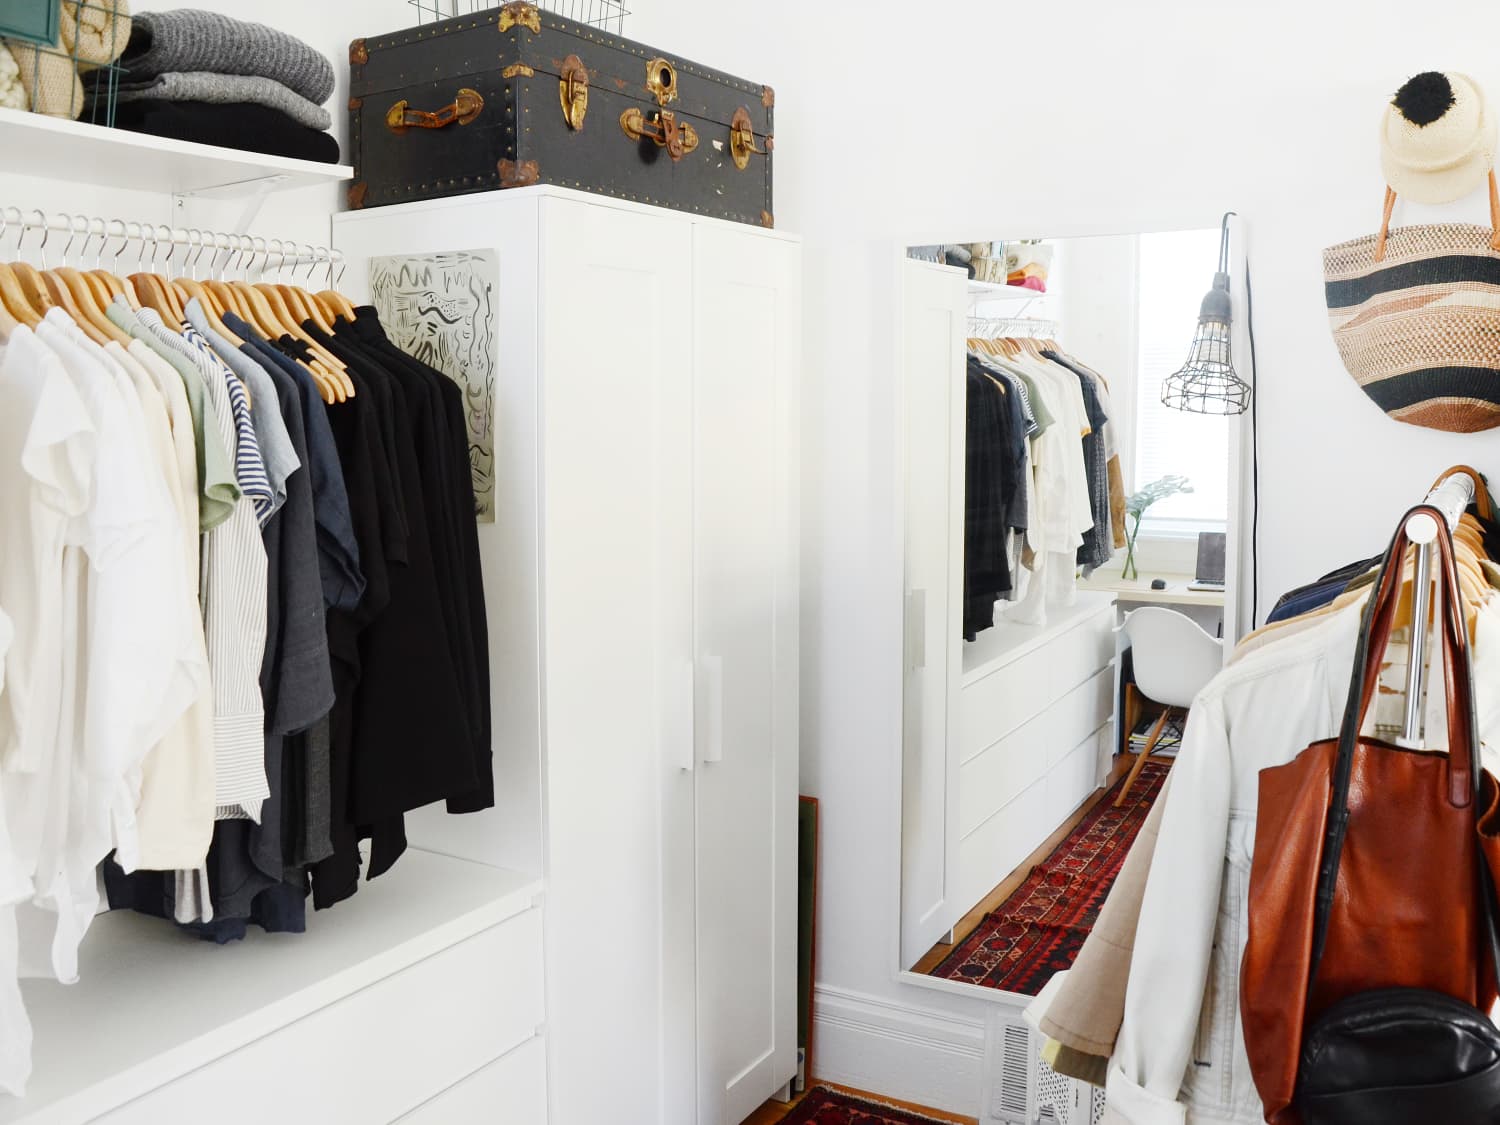 Space Mini Triangles Creates Up to 3X More Closet Space Hooks